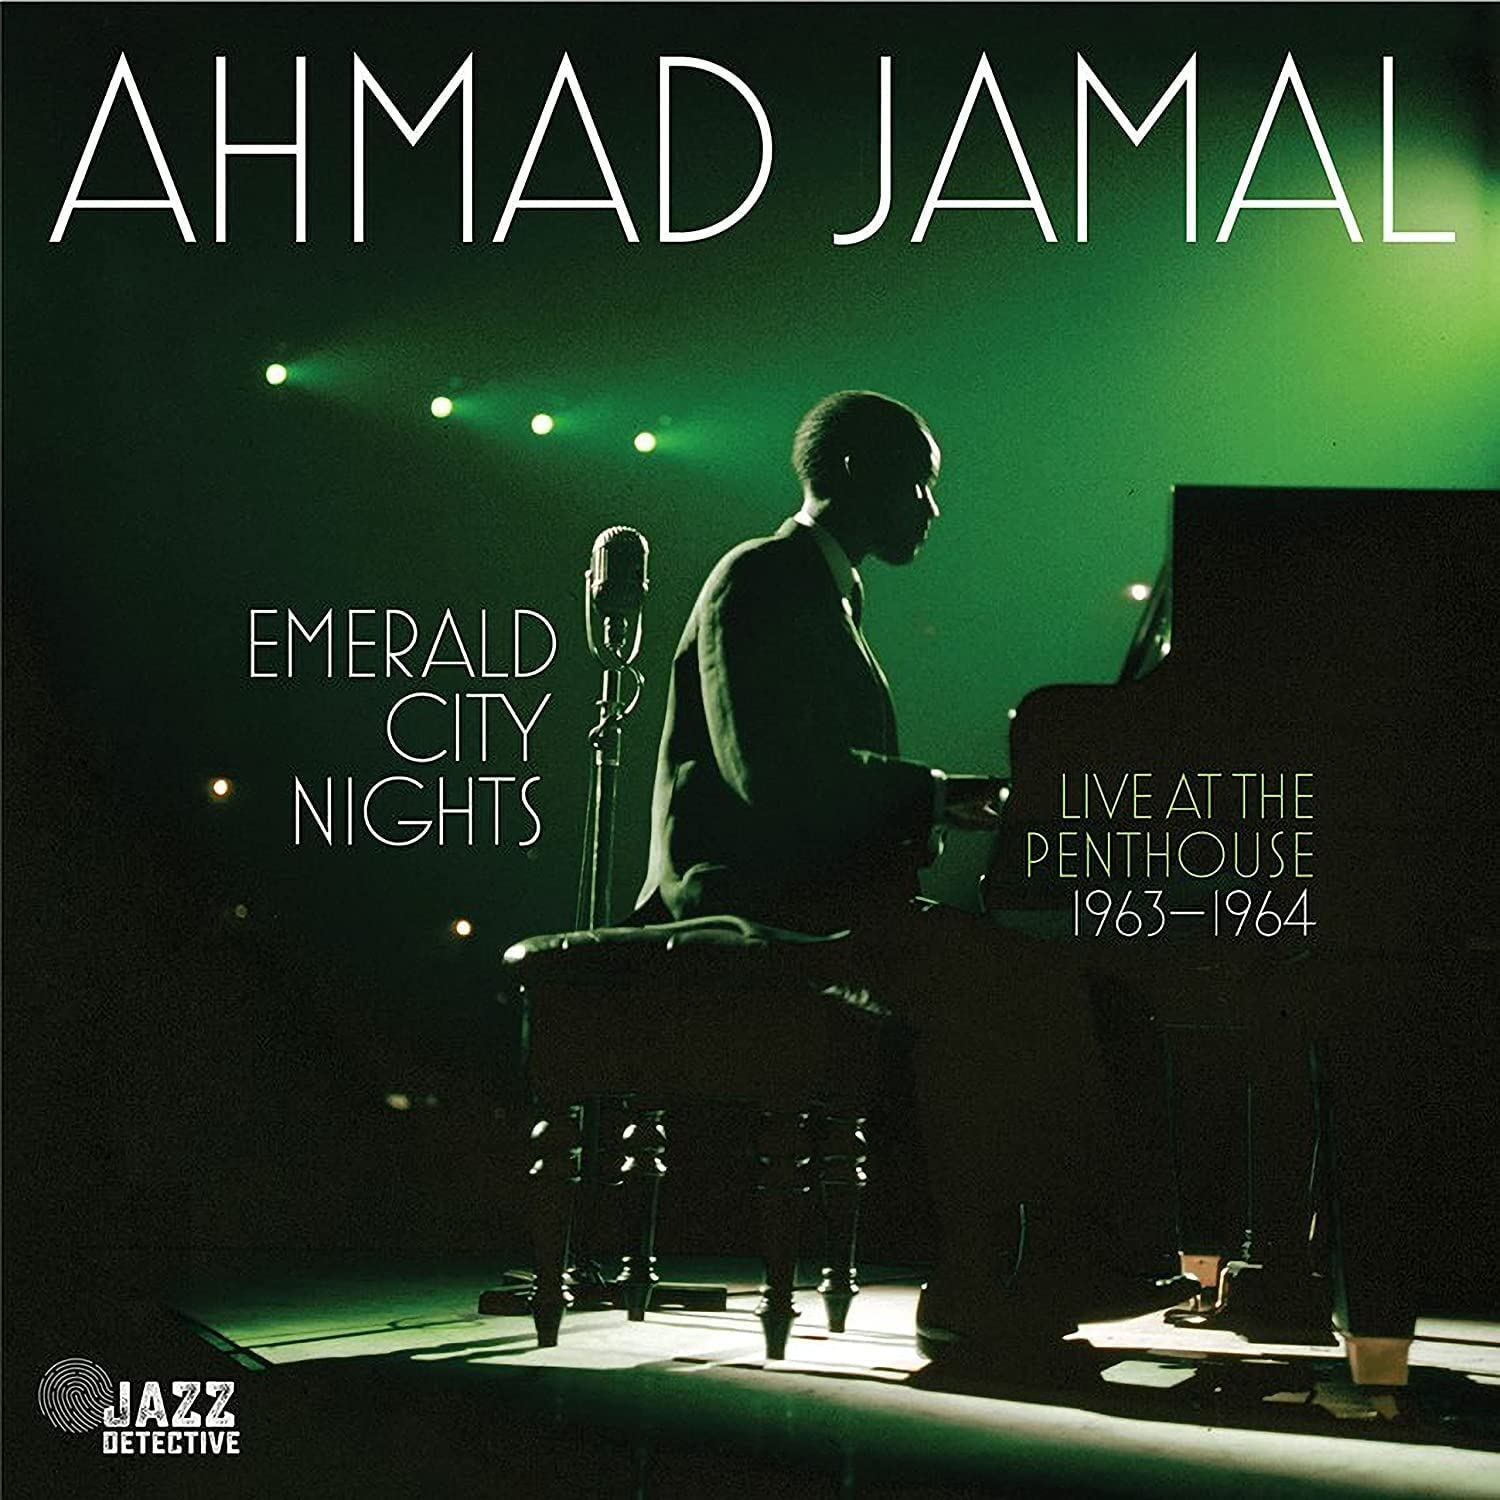 Emerald City Nights - Live at the Penthouse 1963-1964 (Vol. 1)